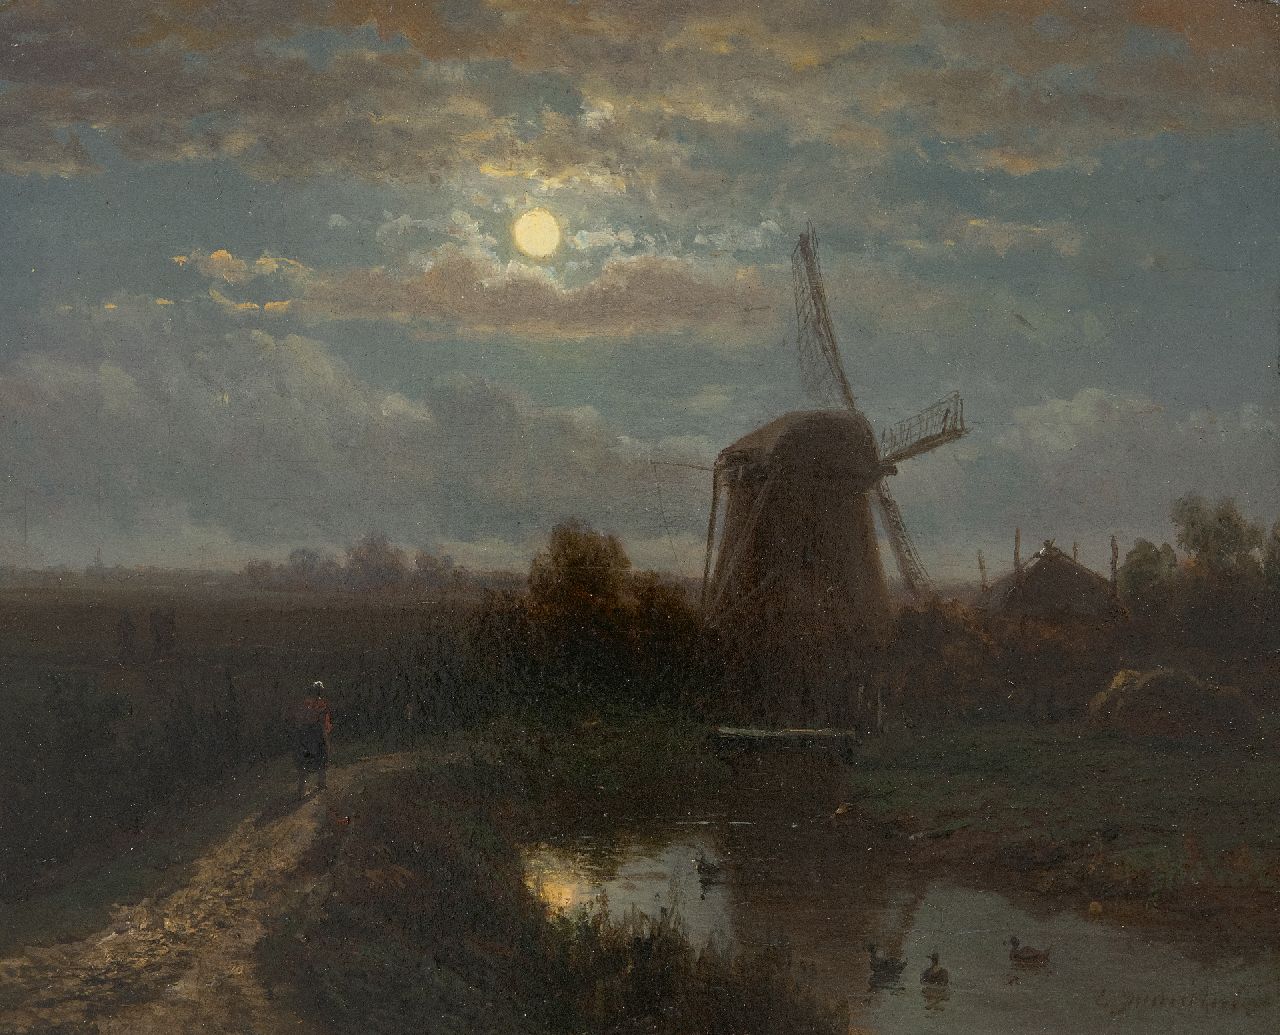 Immerzeel C.  | Christiaan Immerzeel | Paintings offered for sale | Moonlit landscape with a windmill, oil on panel 21.0 x 26.0 cm